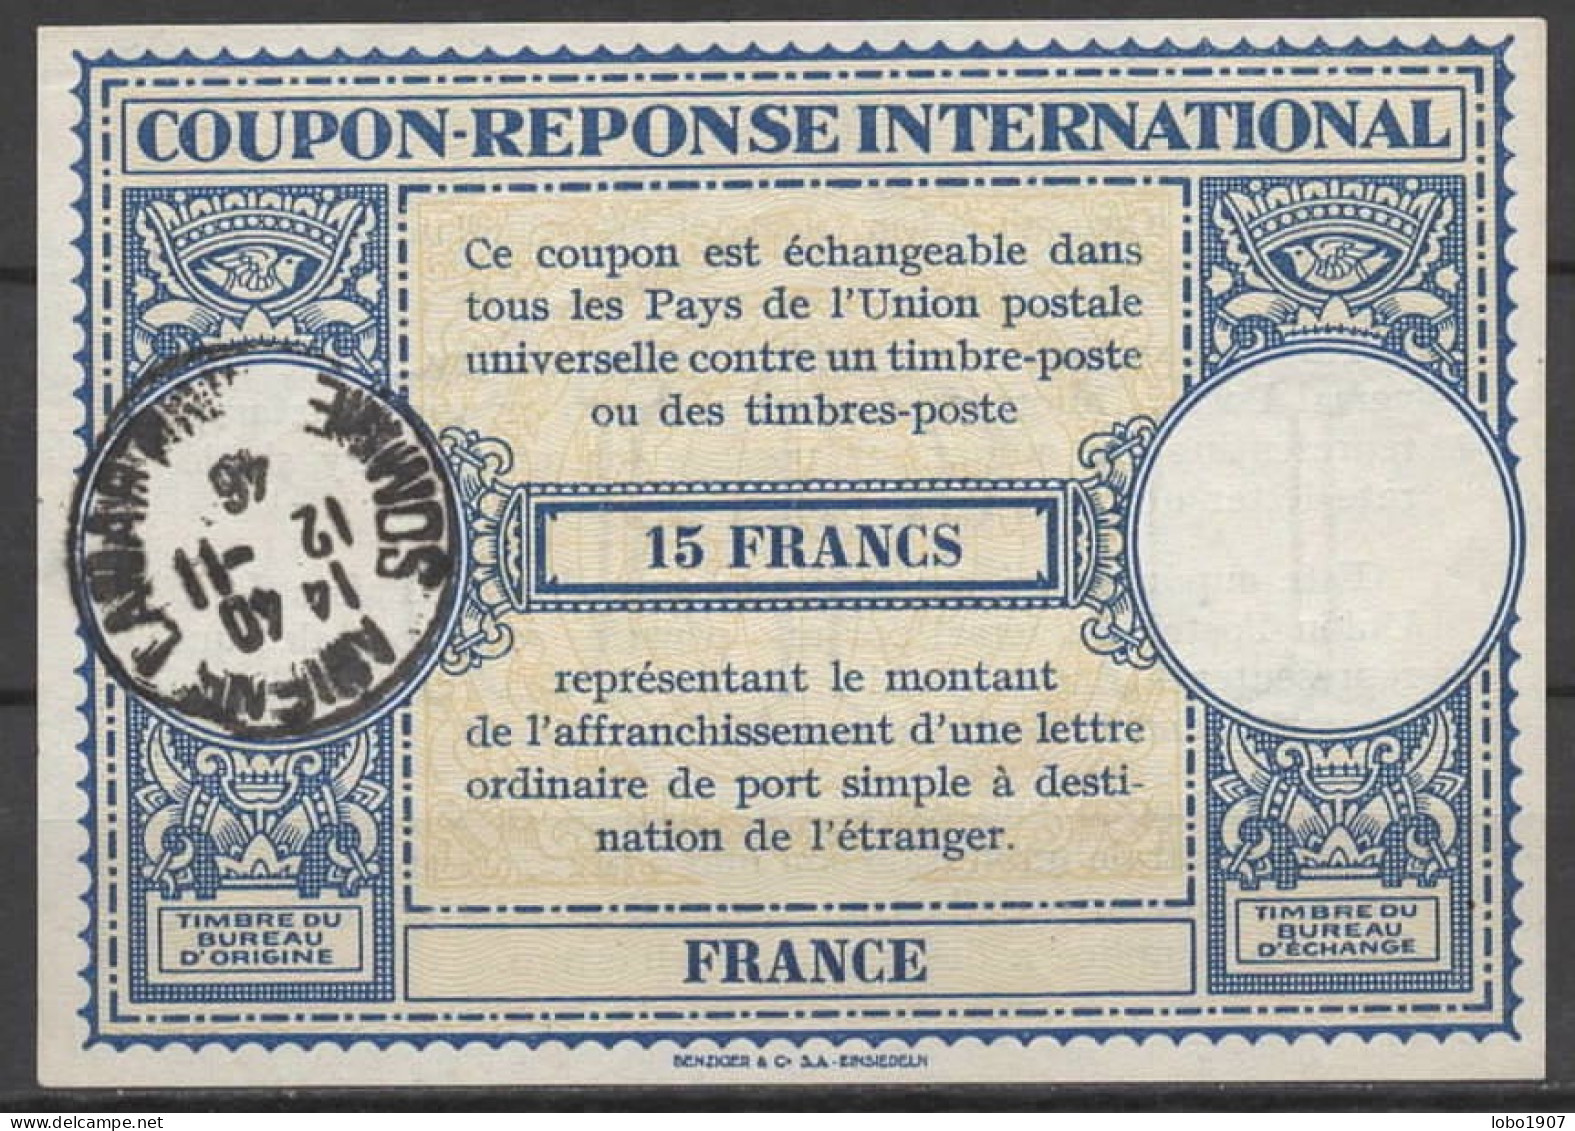 FRANCE  Lo14o  15 FRANCS  International Reply Coupon Reponse Antwortschein IRC IAS Cupon Respuesta O AMIENS LAMARTINE - - Coupons-réponse